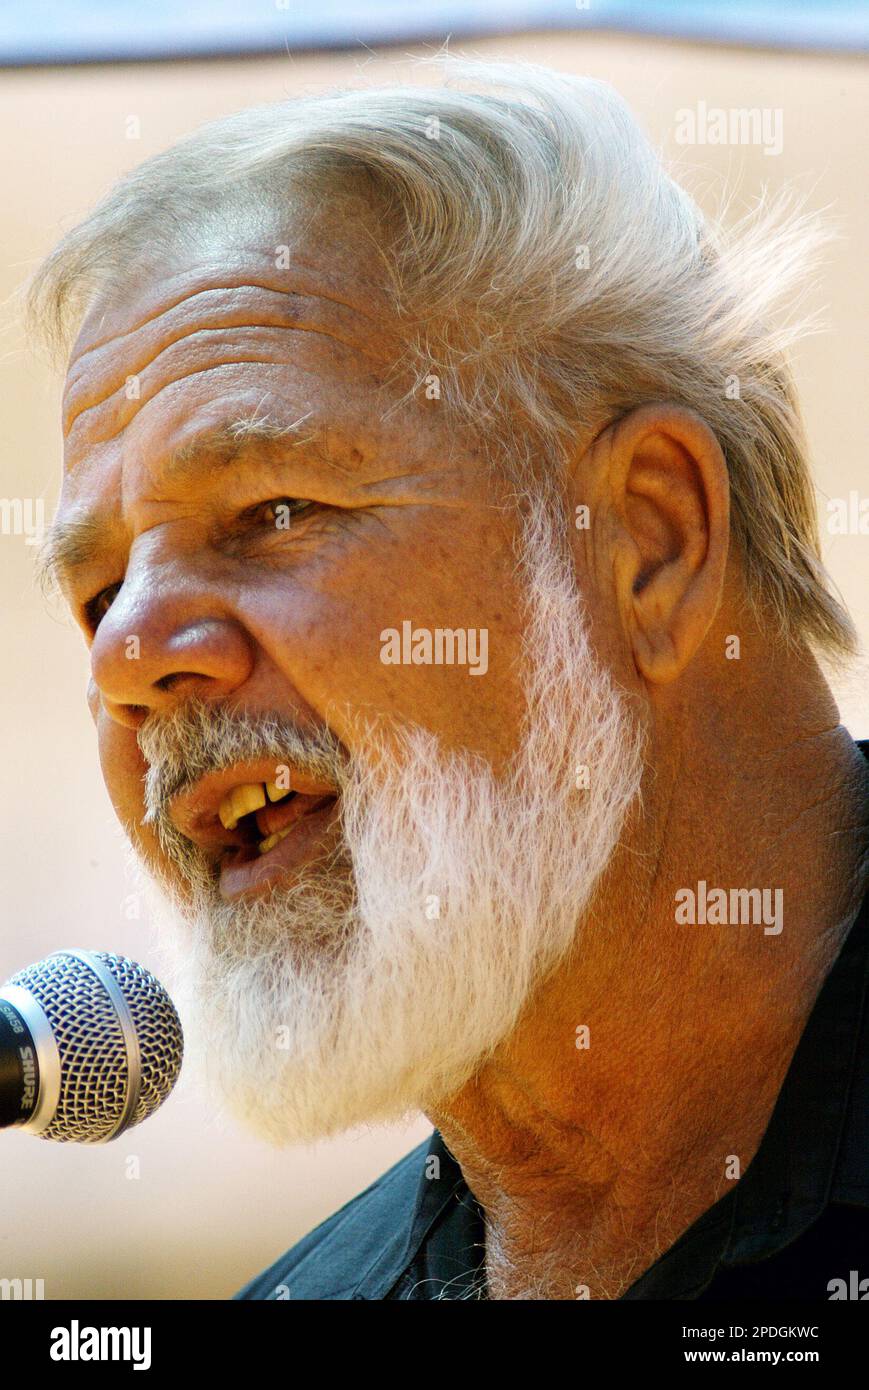 Eugene Terreblanche, leader of the South African far-right political  movement the Afrikaners Weerstandsbeweging (AWB), addresses an AWB public  meeting in Boksburg, South Africa on February 22, 1989. (AP Photo Stock  Photo - Alamy